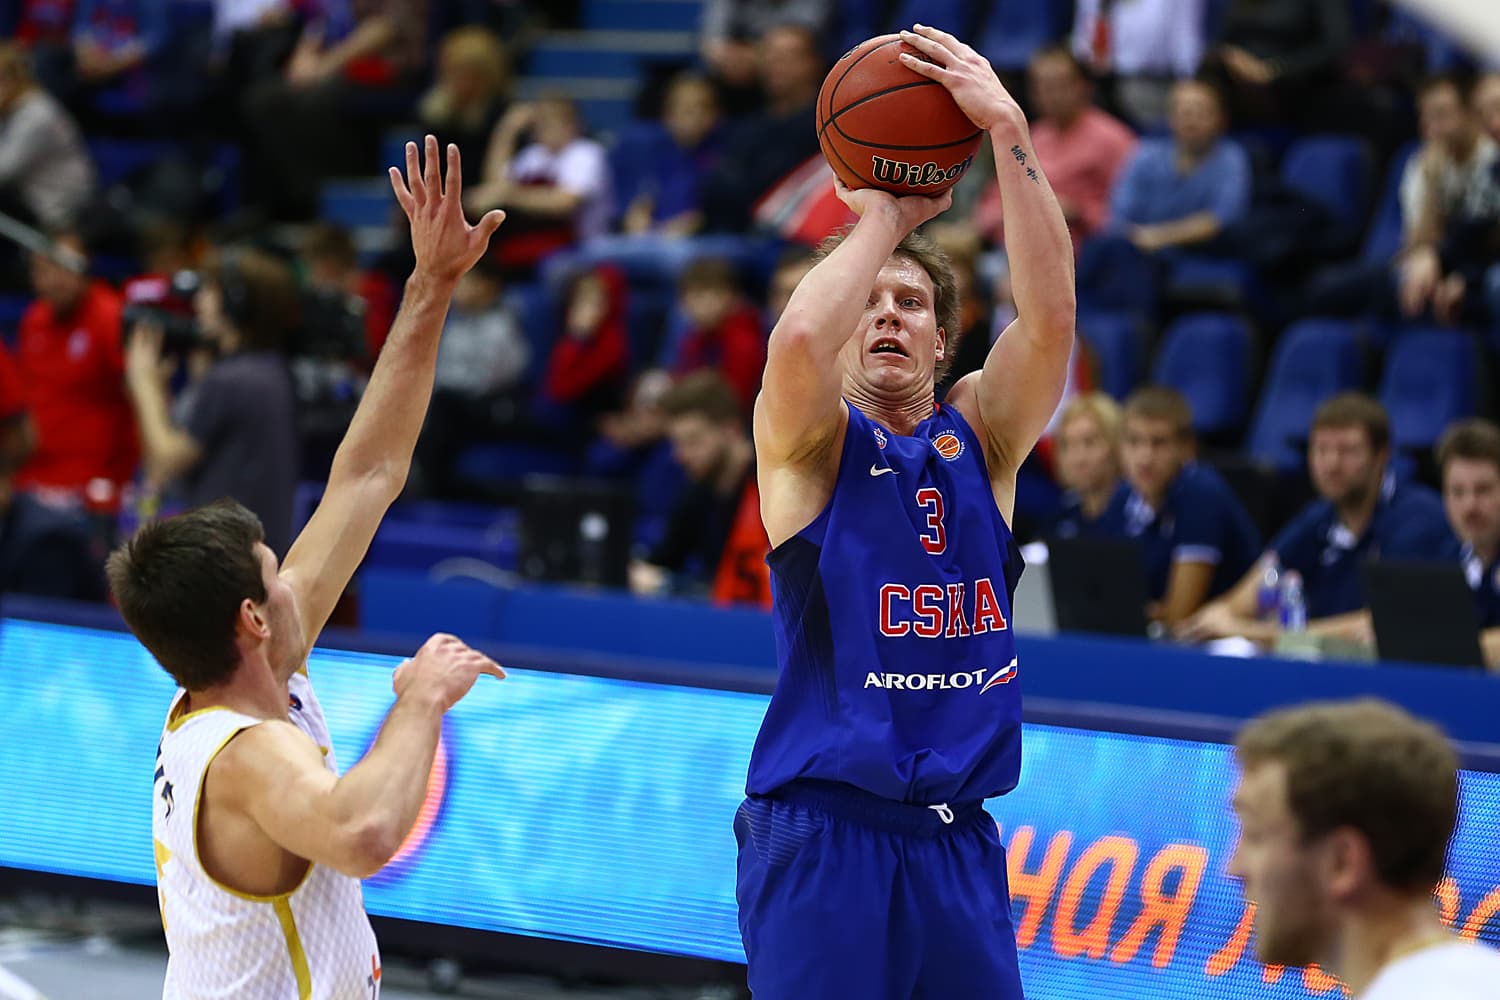 CSKA Blasts Parma In 2nd Half To Remain Undefeated